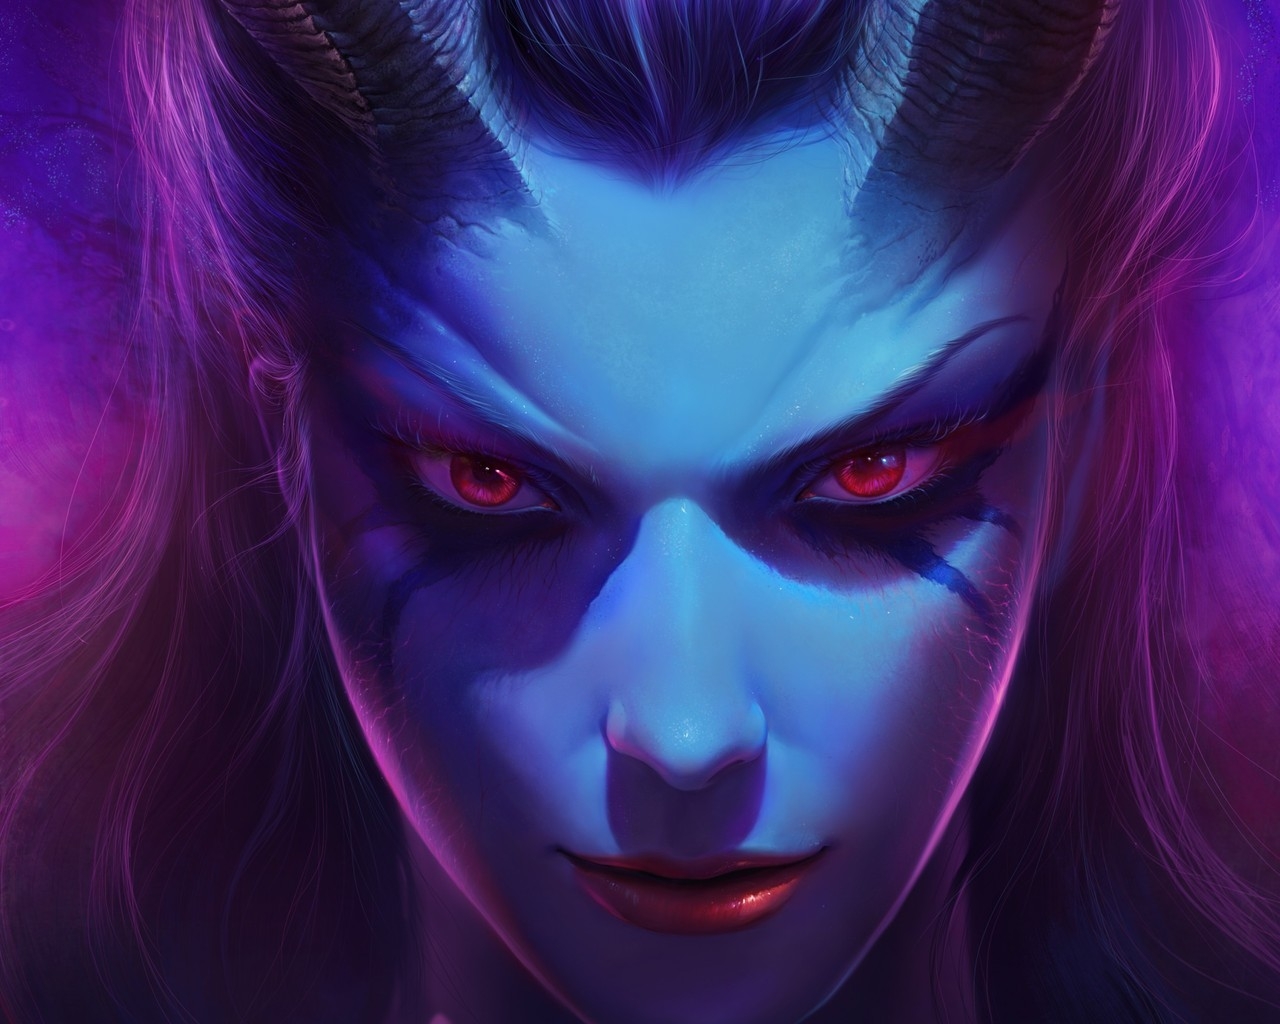 Queen of Pain for 1280 x 1024 resolution